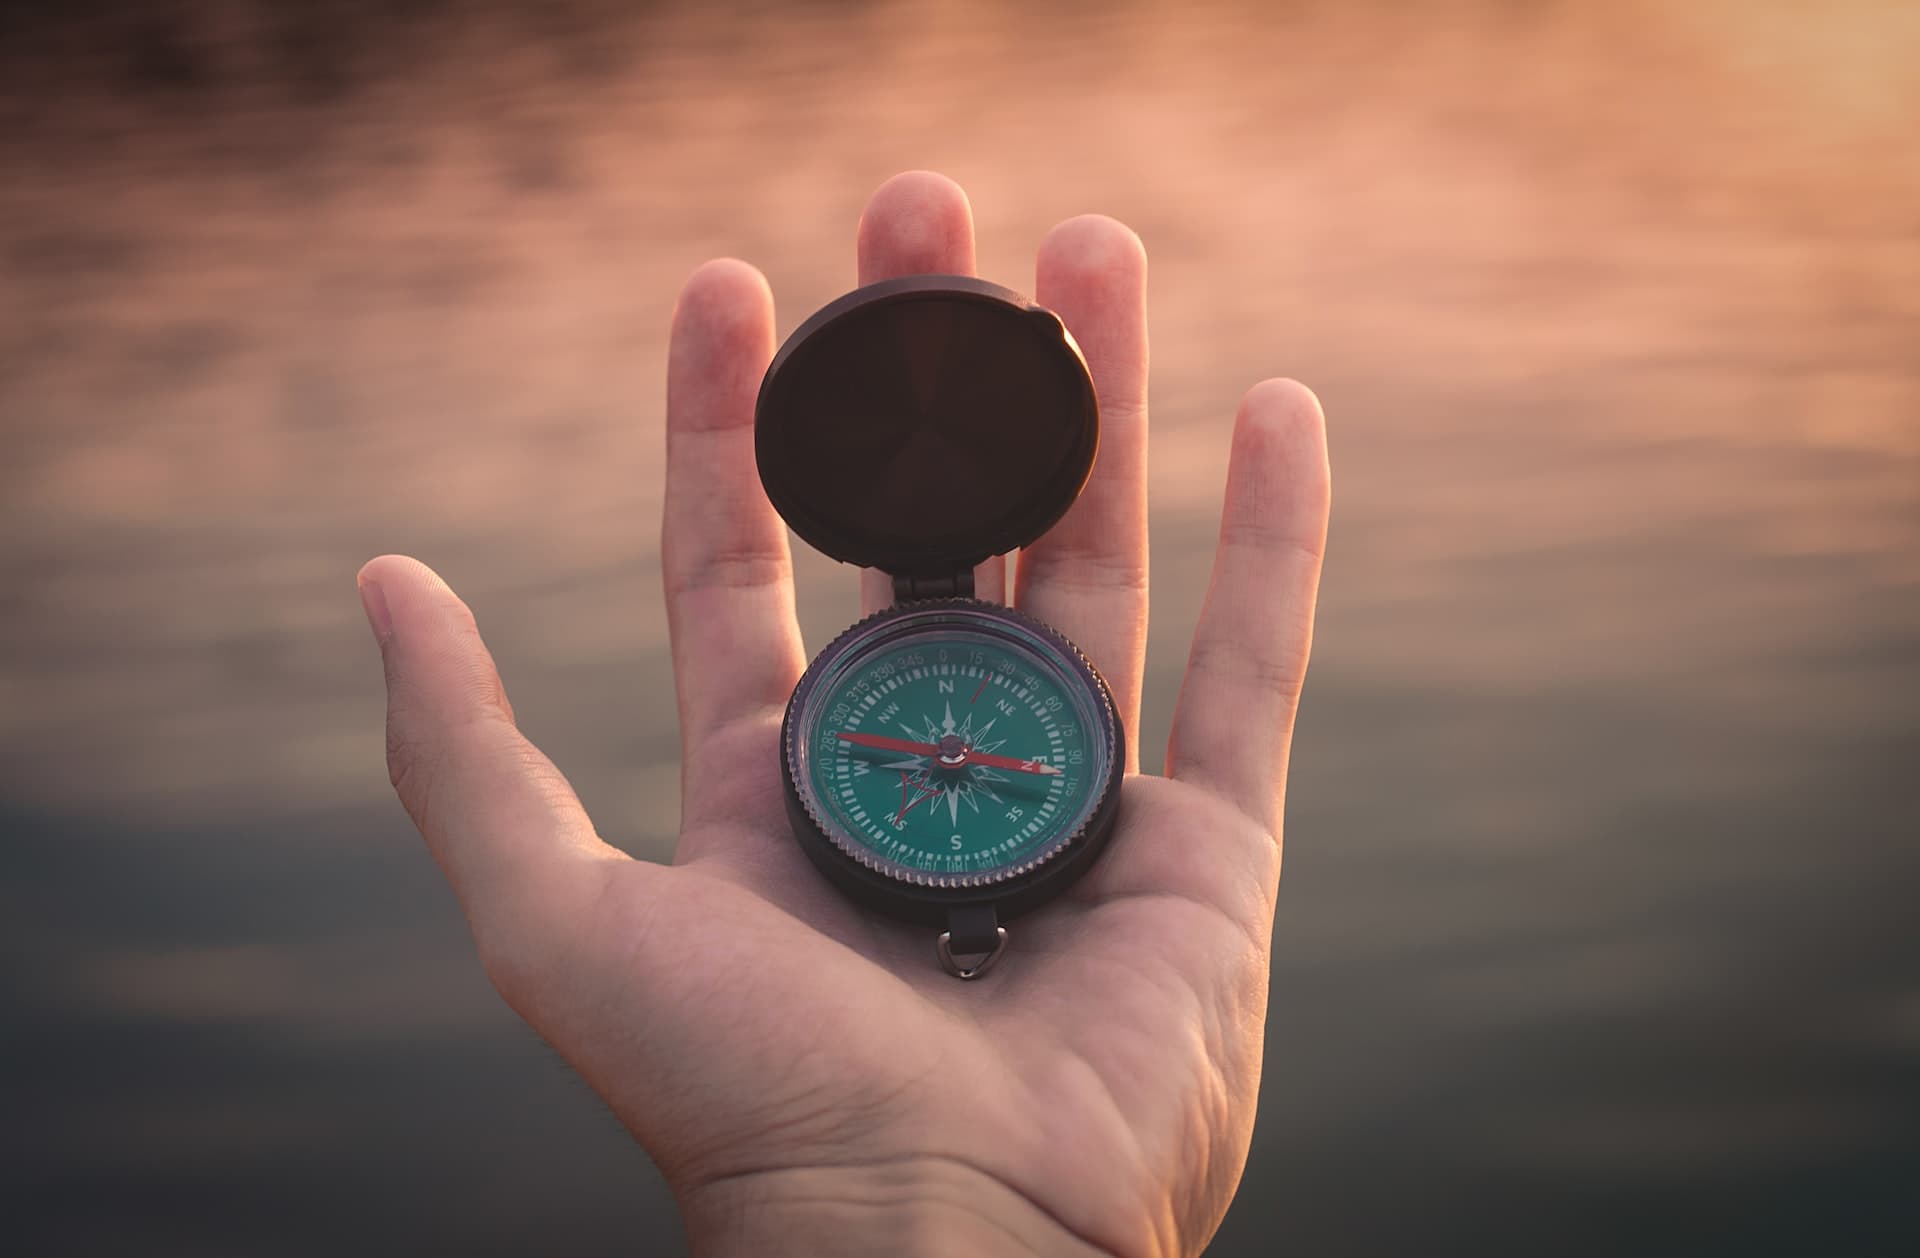 A hand holding a compass, sunset light reflecting on water in the background